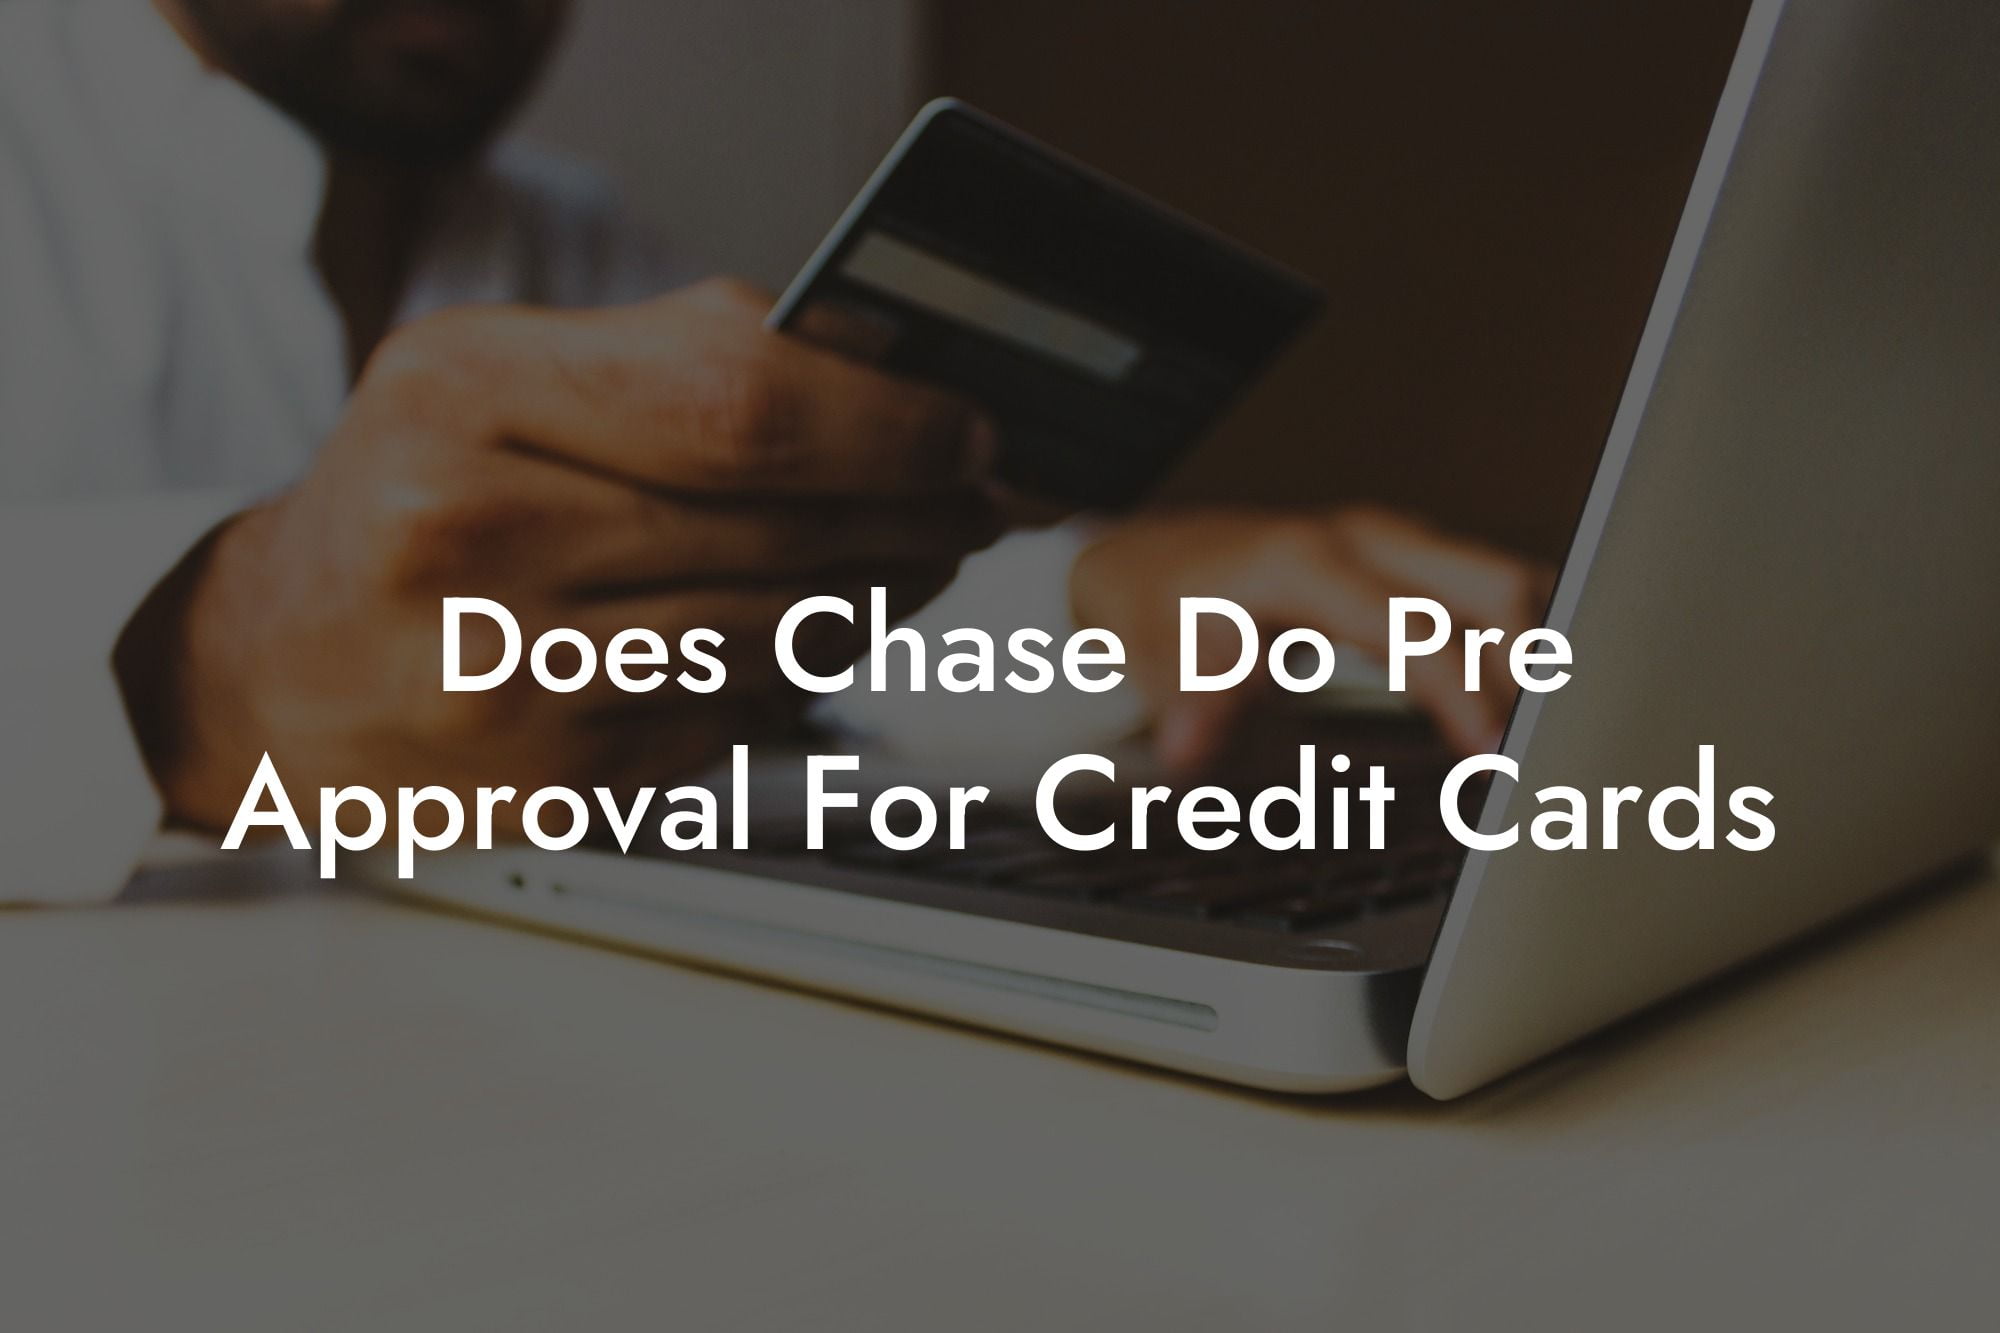 Does Chase Do Pre Approval For Credit Cards